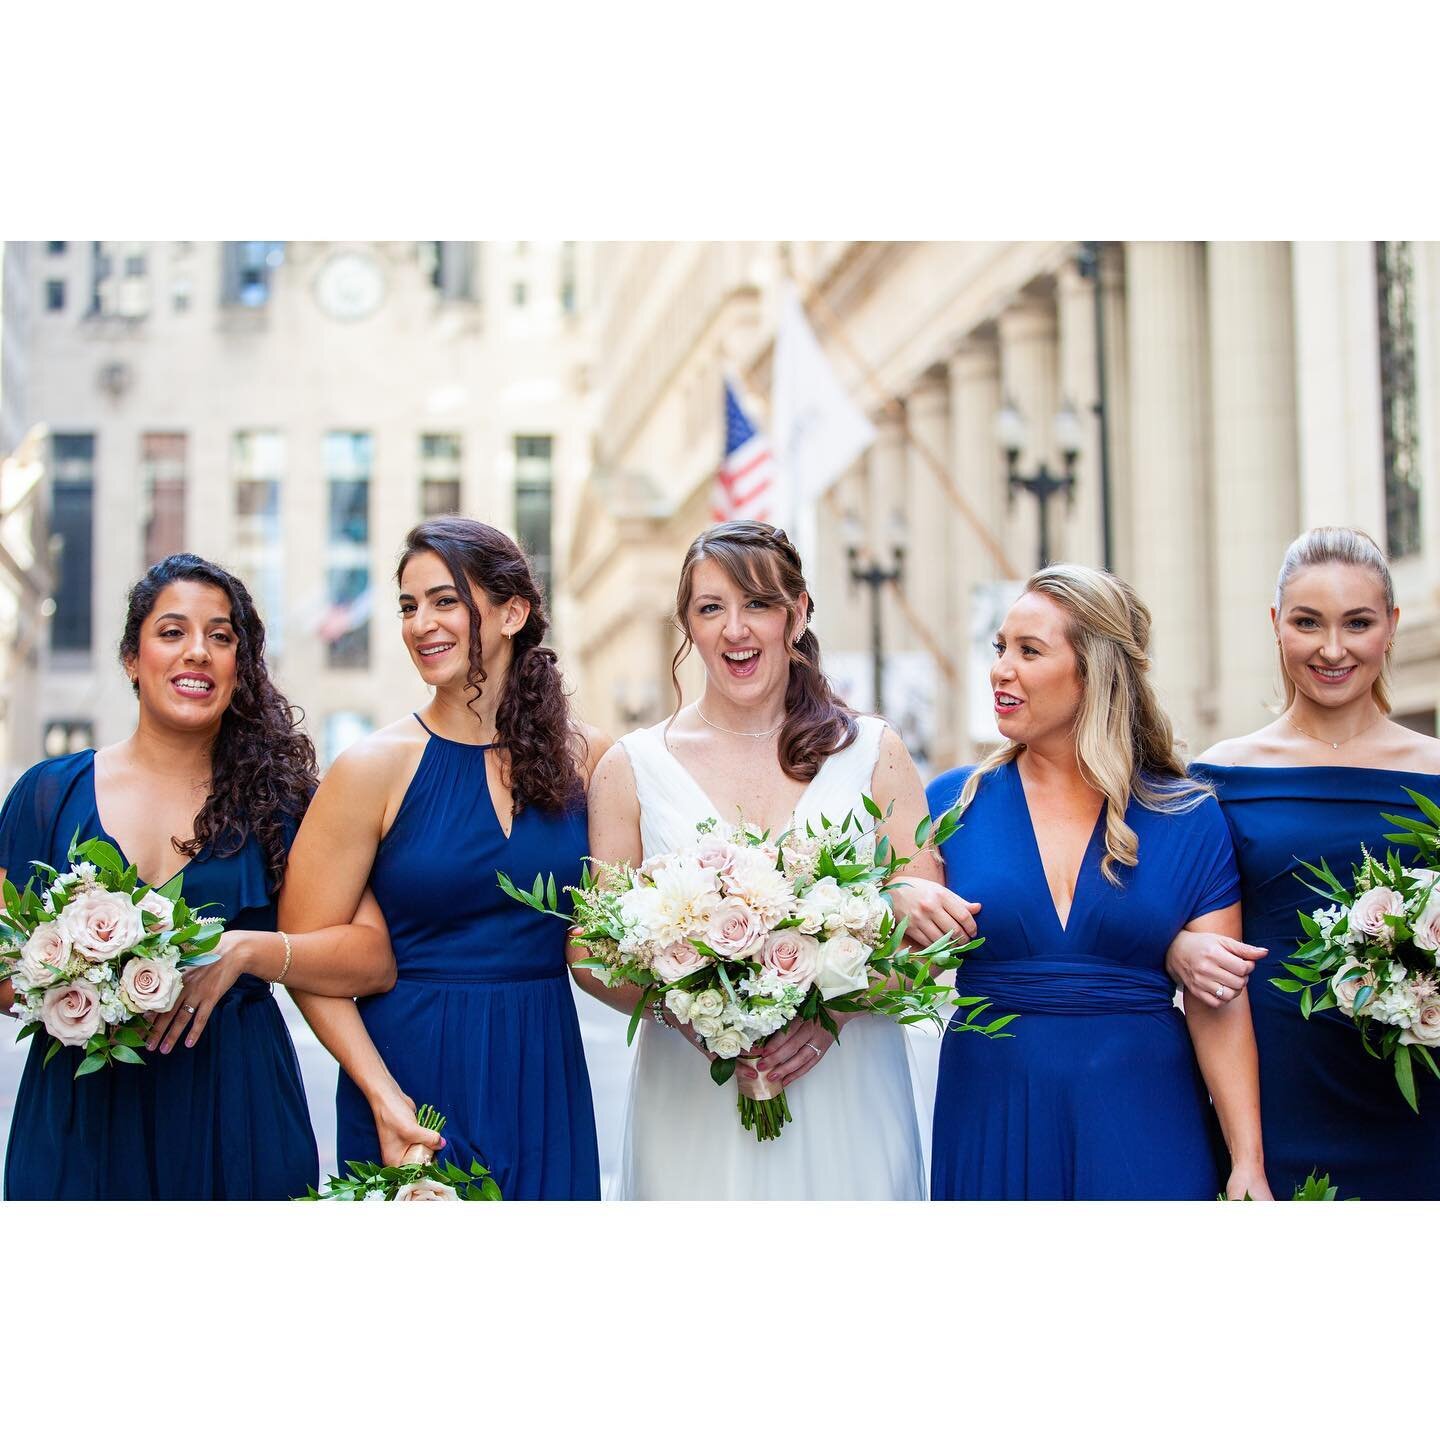 Friends and Bridesmaids .
.
Hotel: @thegraychi 
Catering: @dabsolute_events 
Florals: @stevesflowermarket 
Decor: @art_imagination 
Cake: @chicagocustomcakes 
Coffee: @onthegojocoffee 
Linens: @fslinens 
Farm Tables: @chgofarmtables
Photography: @Lof